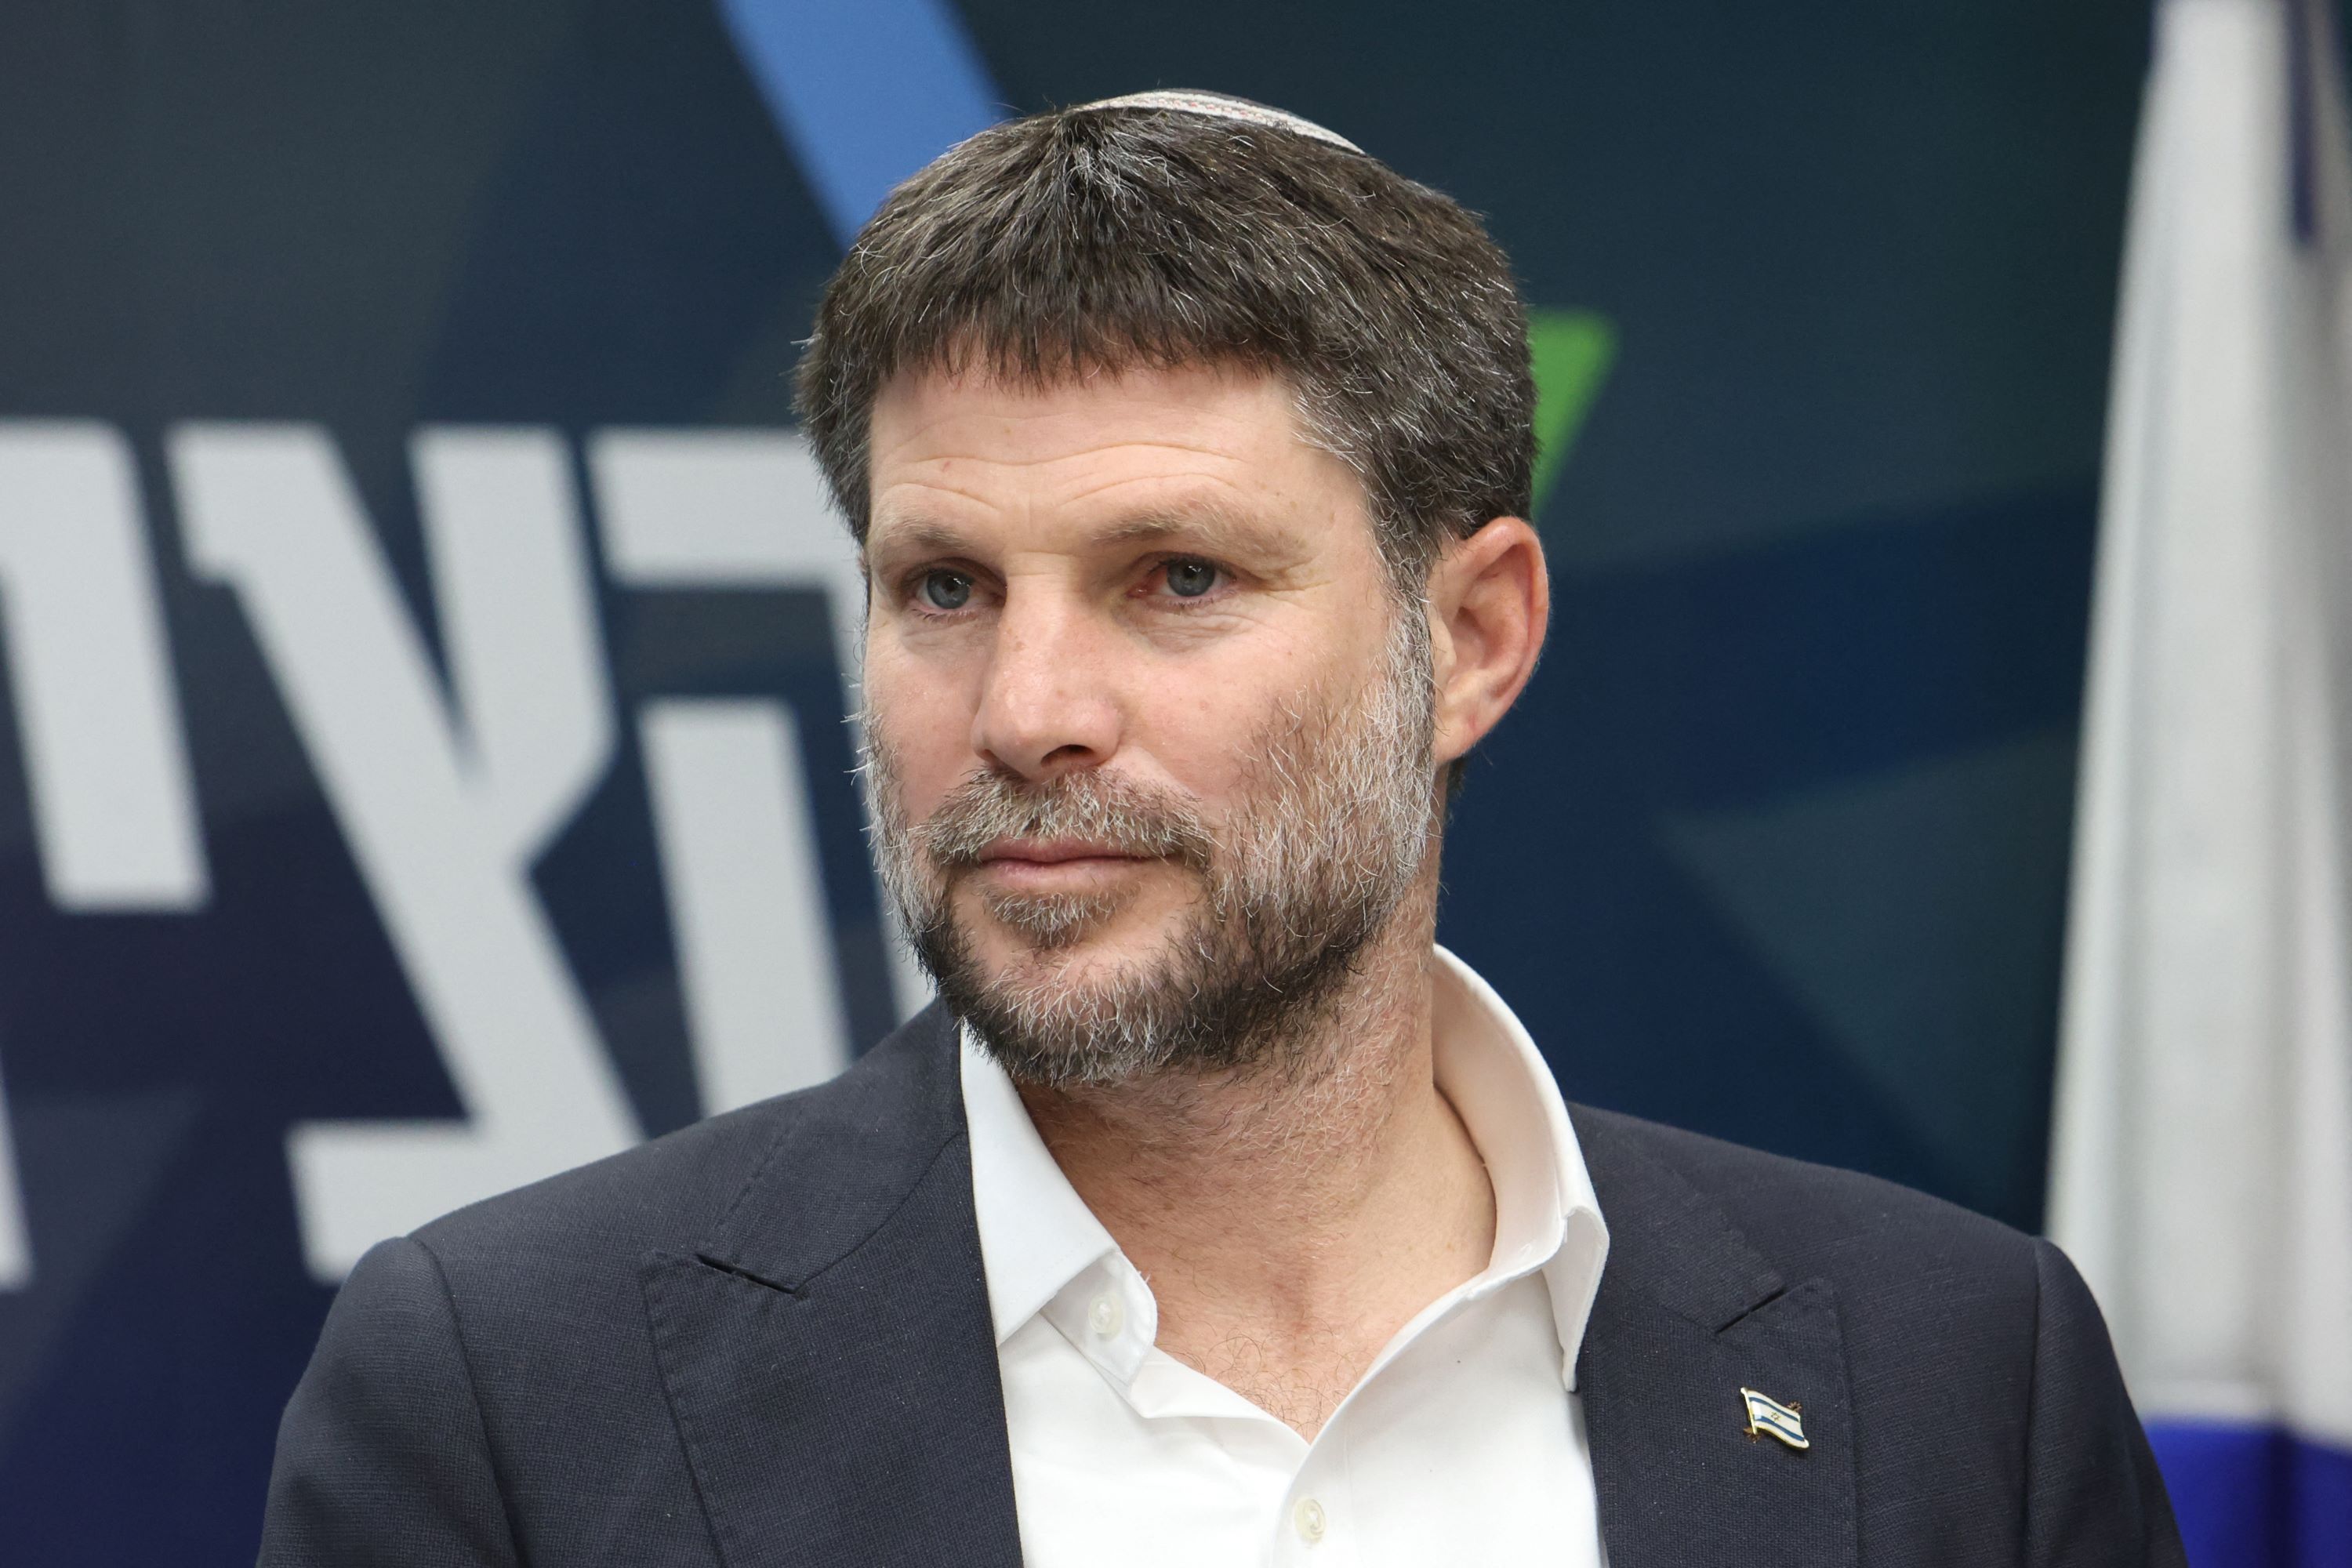 Israel's Finance Minister and leader of the Religious Zionist Party Bezalel Smotrich attends a meeting at the parliament, Knesset, in Jerusalem on March 20, 2023 (AFP)